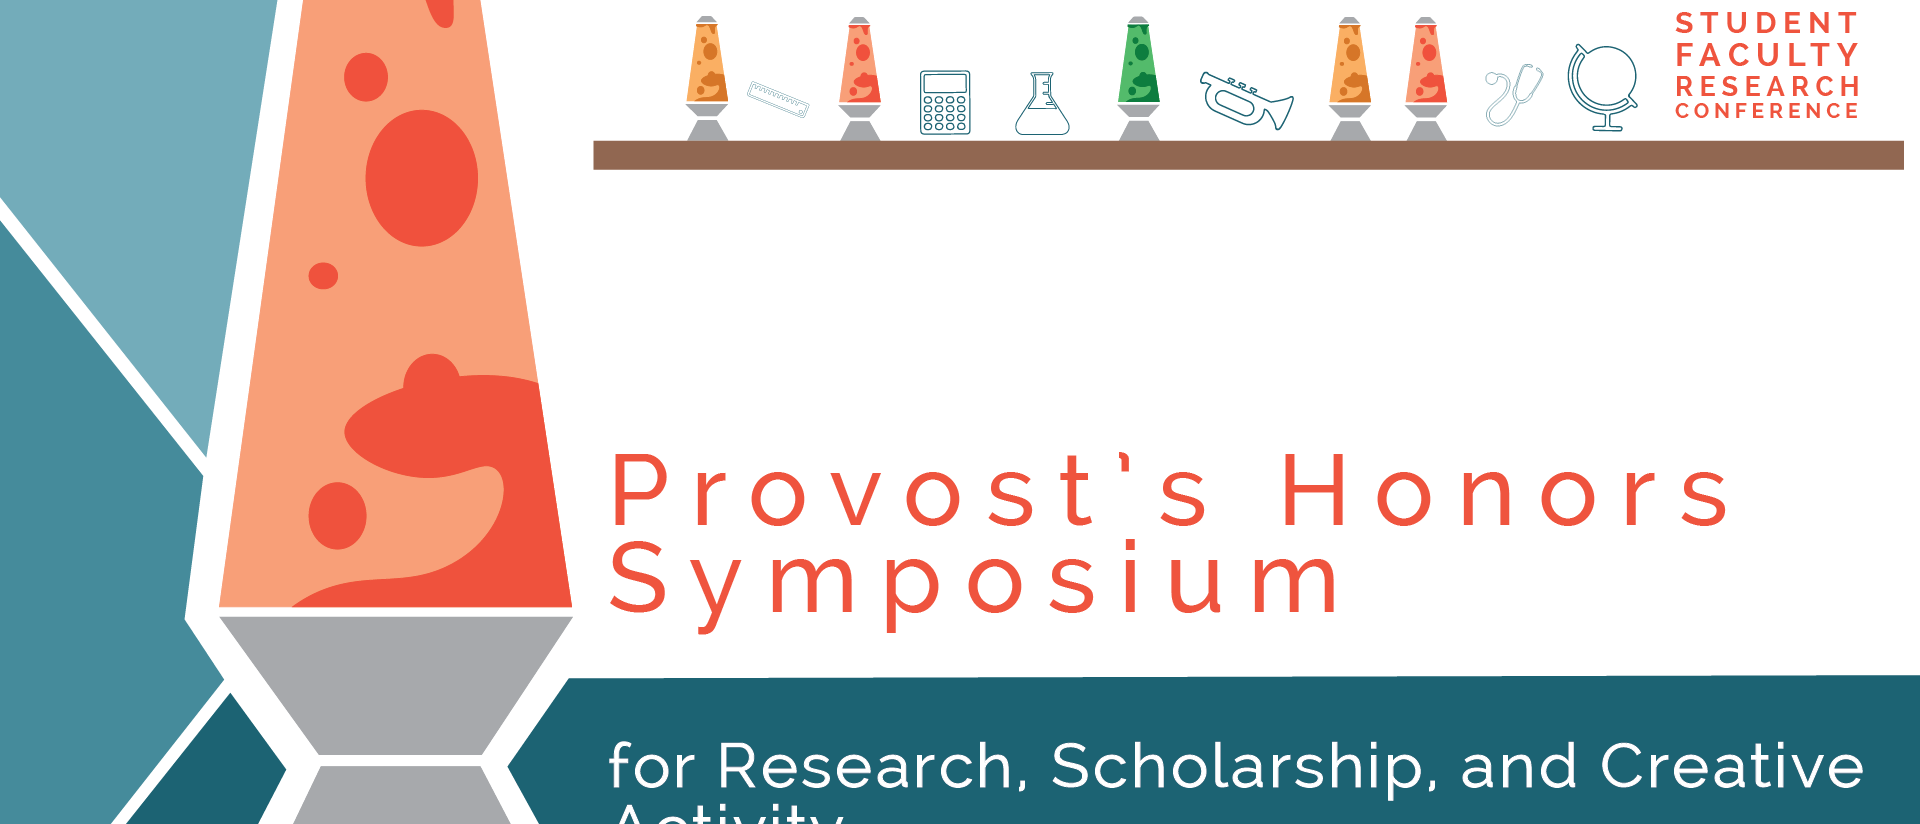 2016 Provost's Honors Symposium